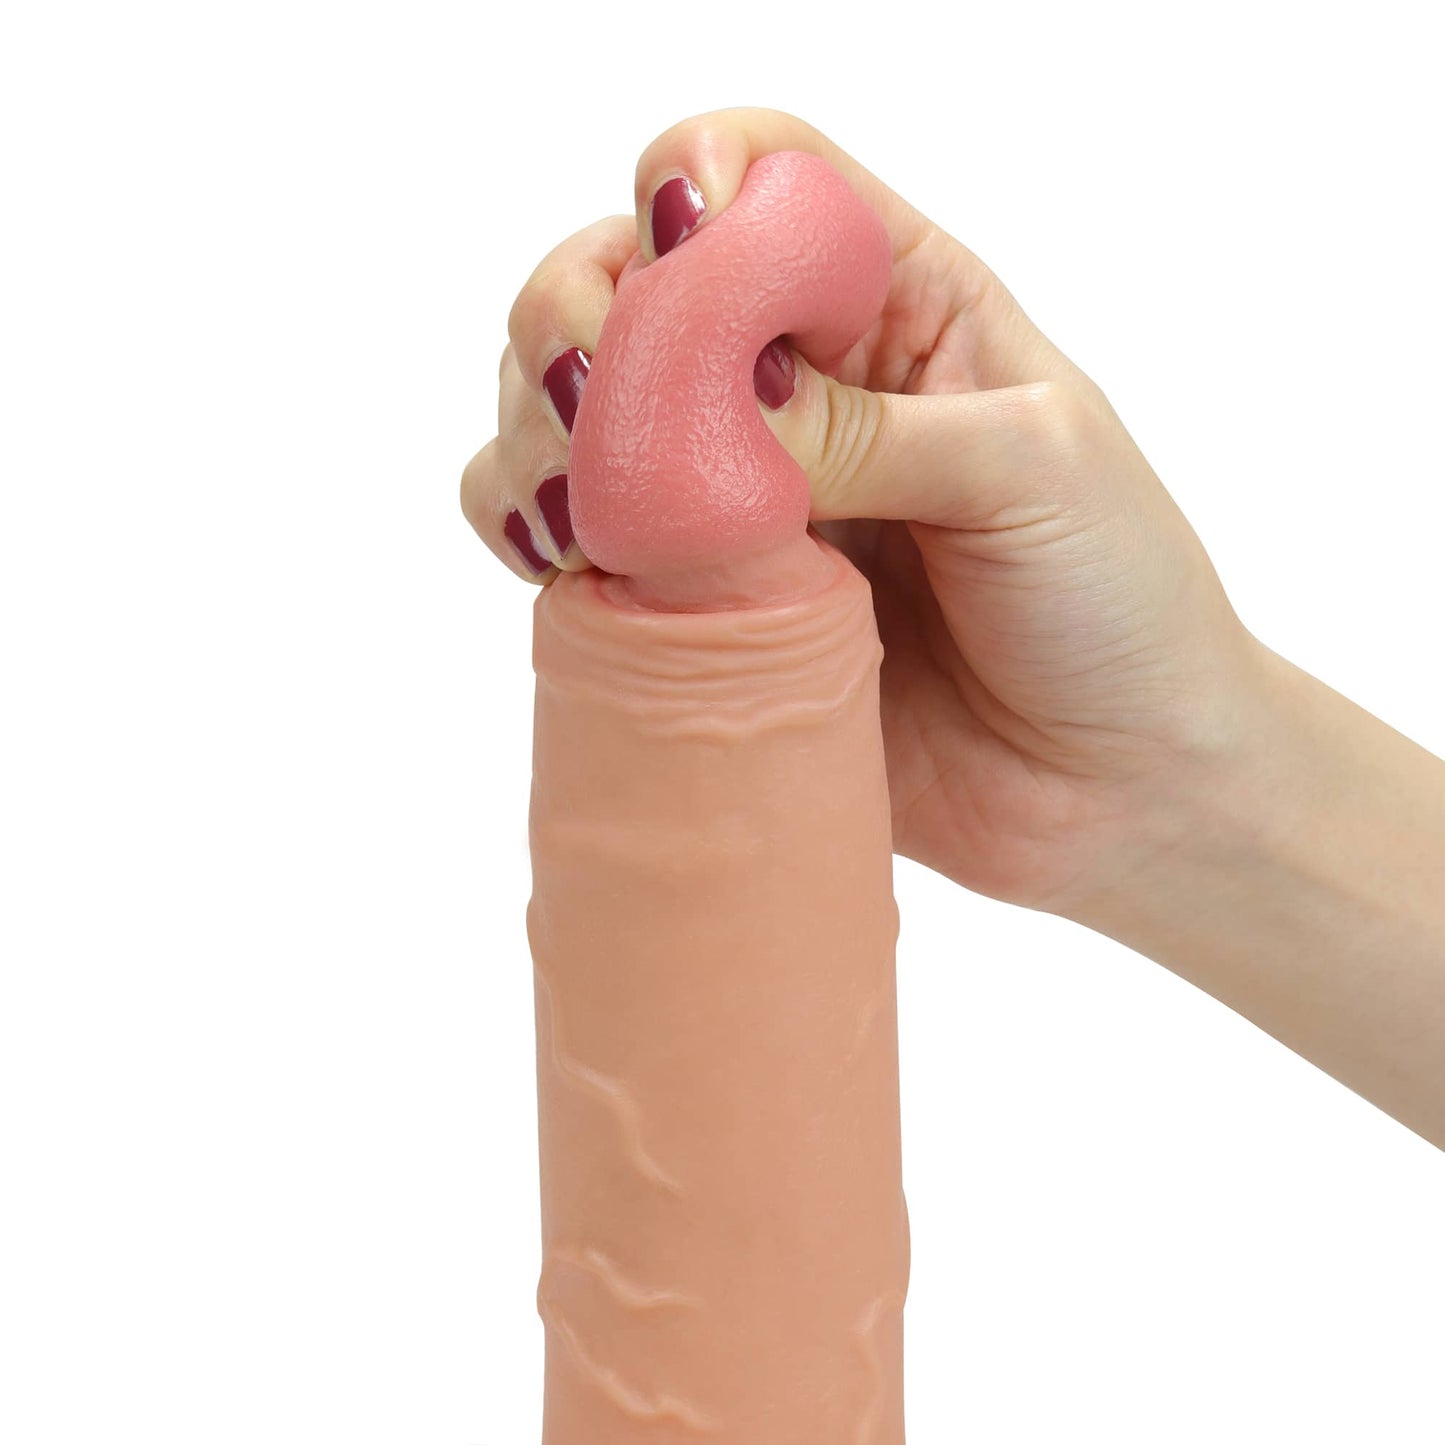 The bulging but soft head of the 8.5 inches silicone hollow strap on harness dildo